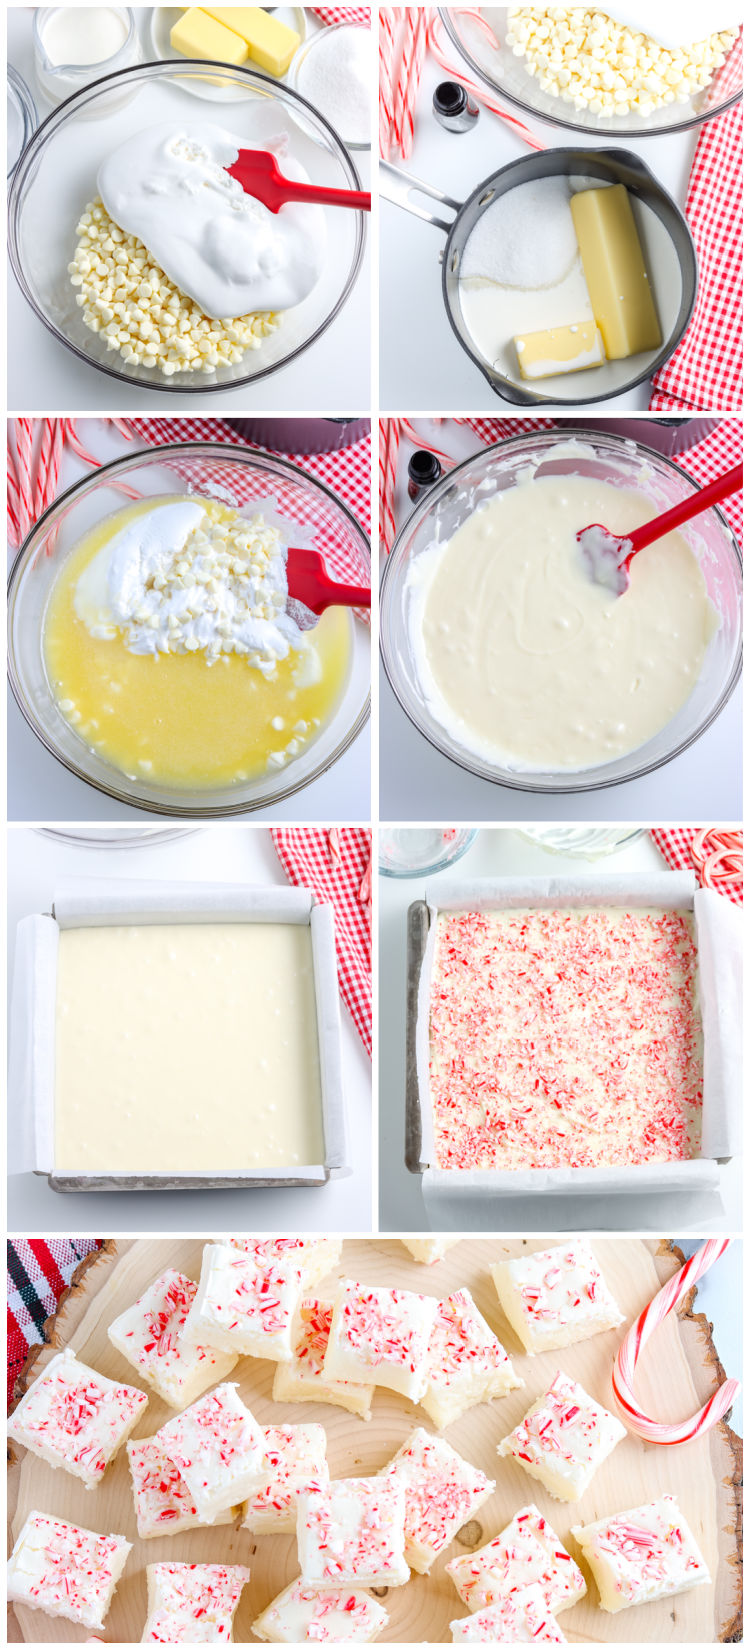 A picture collage showing how to make this White Chocolate Peppermint Fudge recipe.